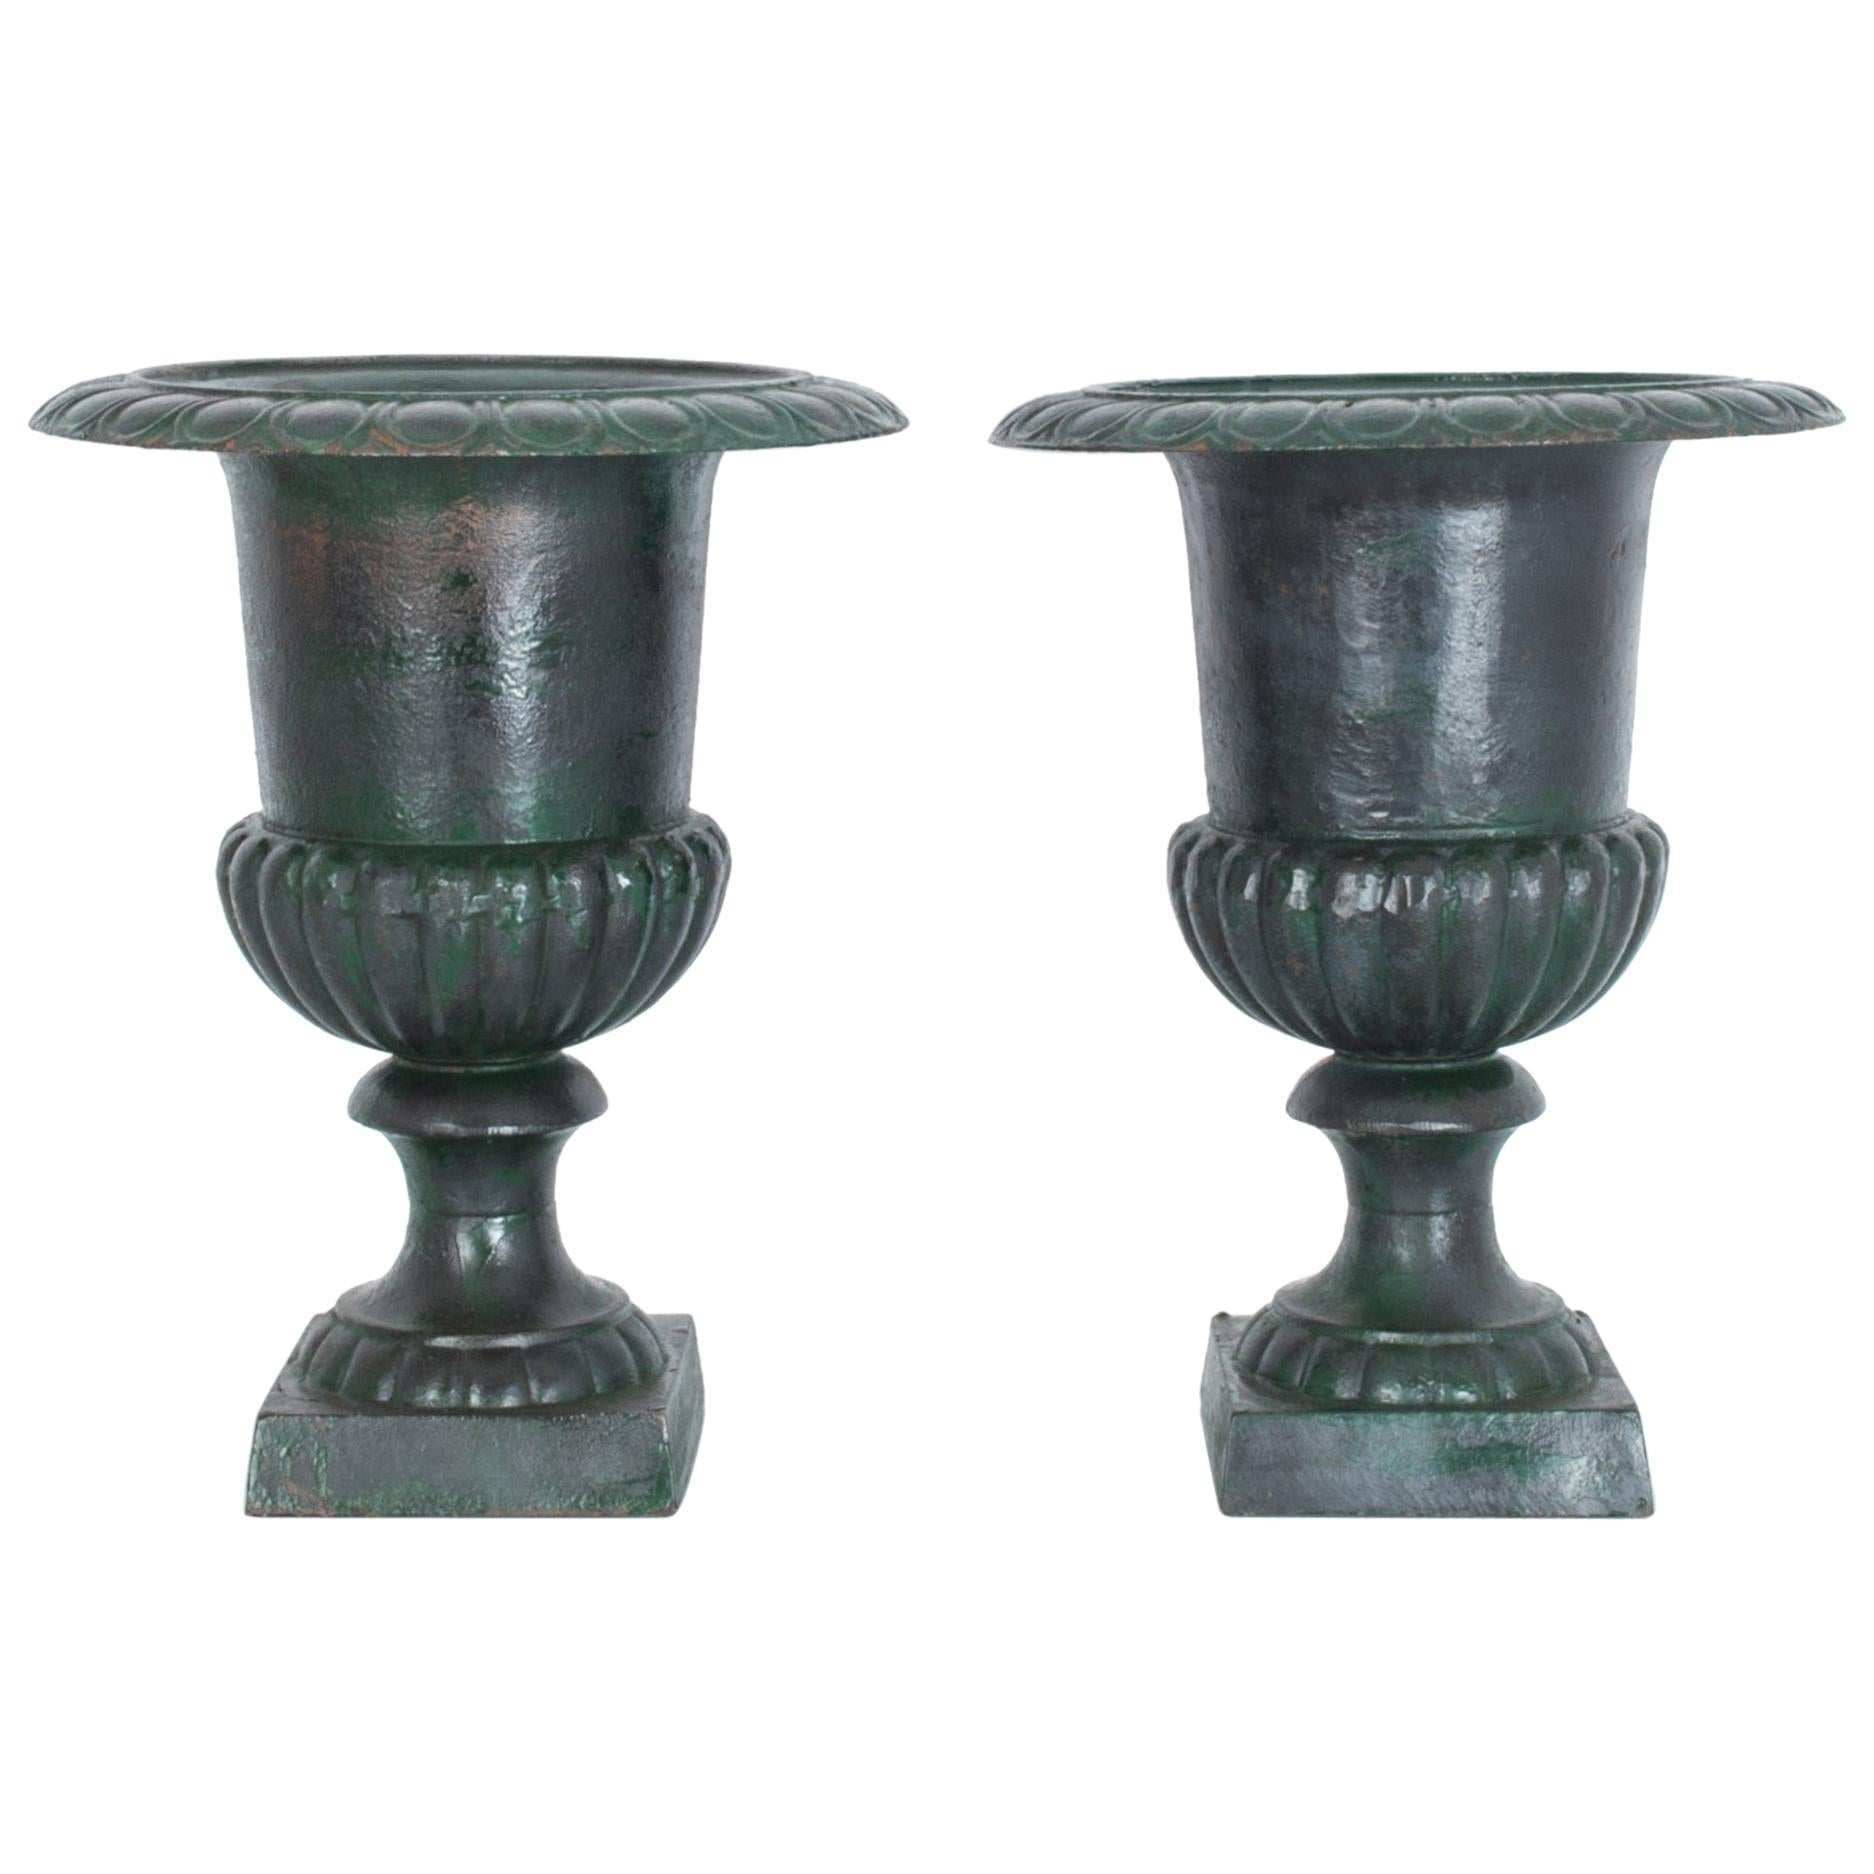 Pair of French Iron Planters, 1920s